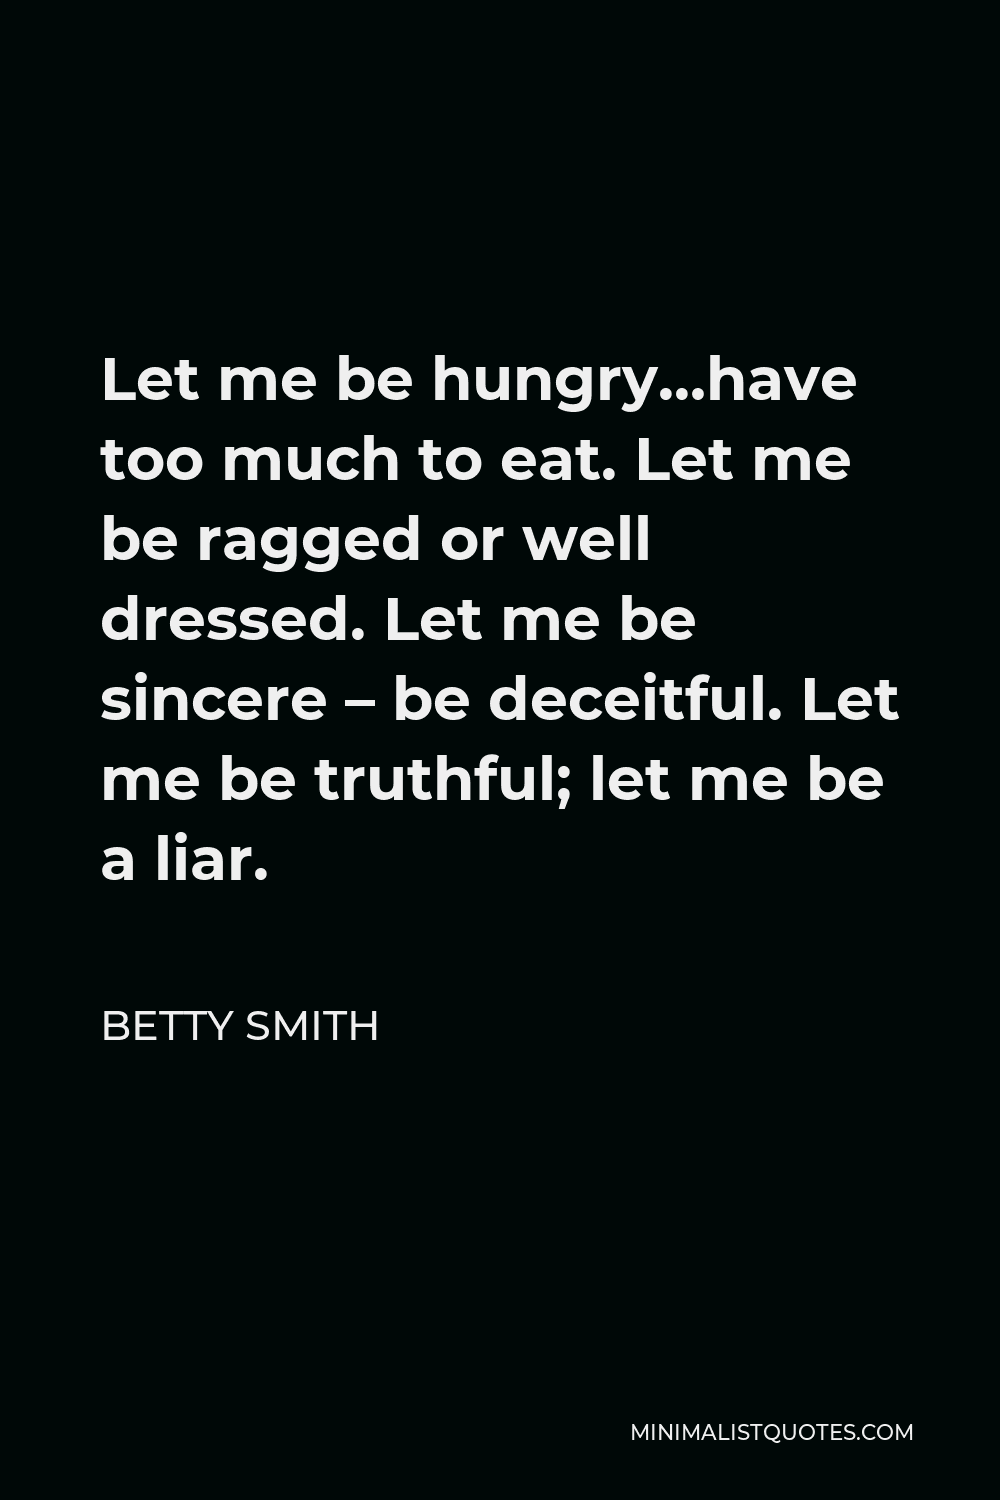 Betty Smith Quote - Let me be hungry…have too much to eat. Let me be ragged or well dressed. Let me be sincere – be deceitful. Let me be truthful; let me be a liar.